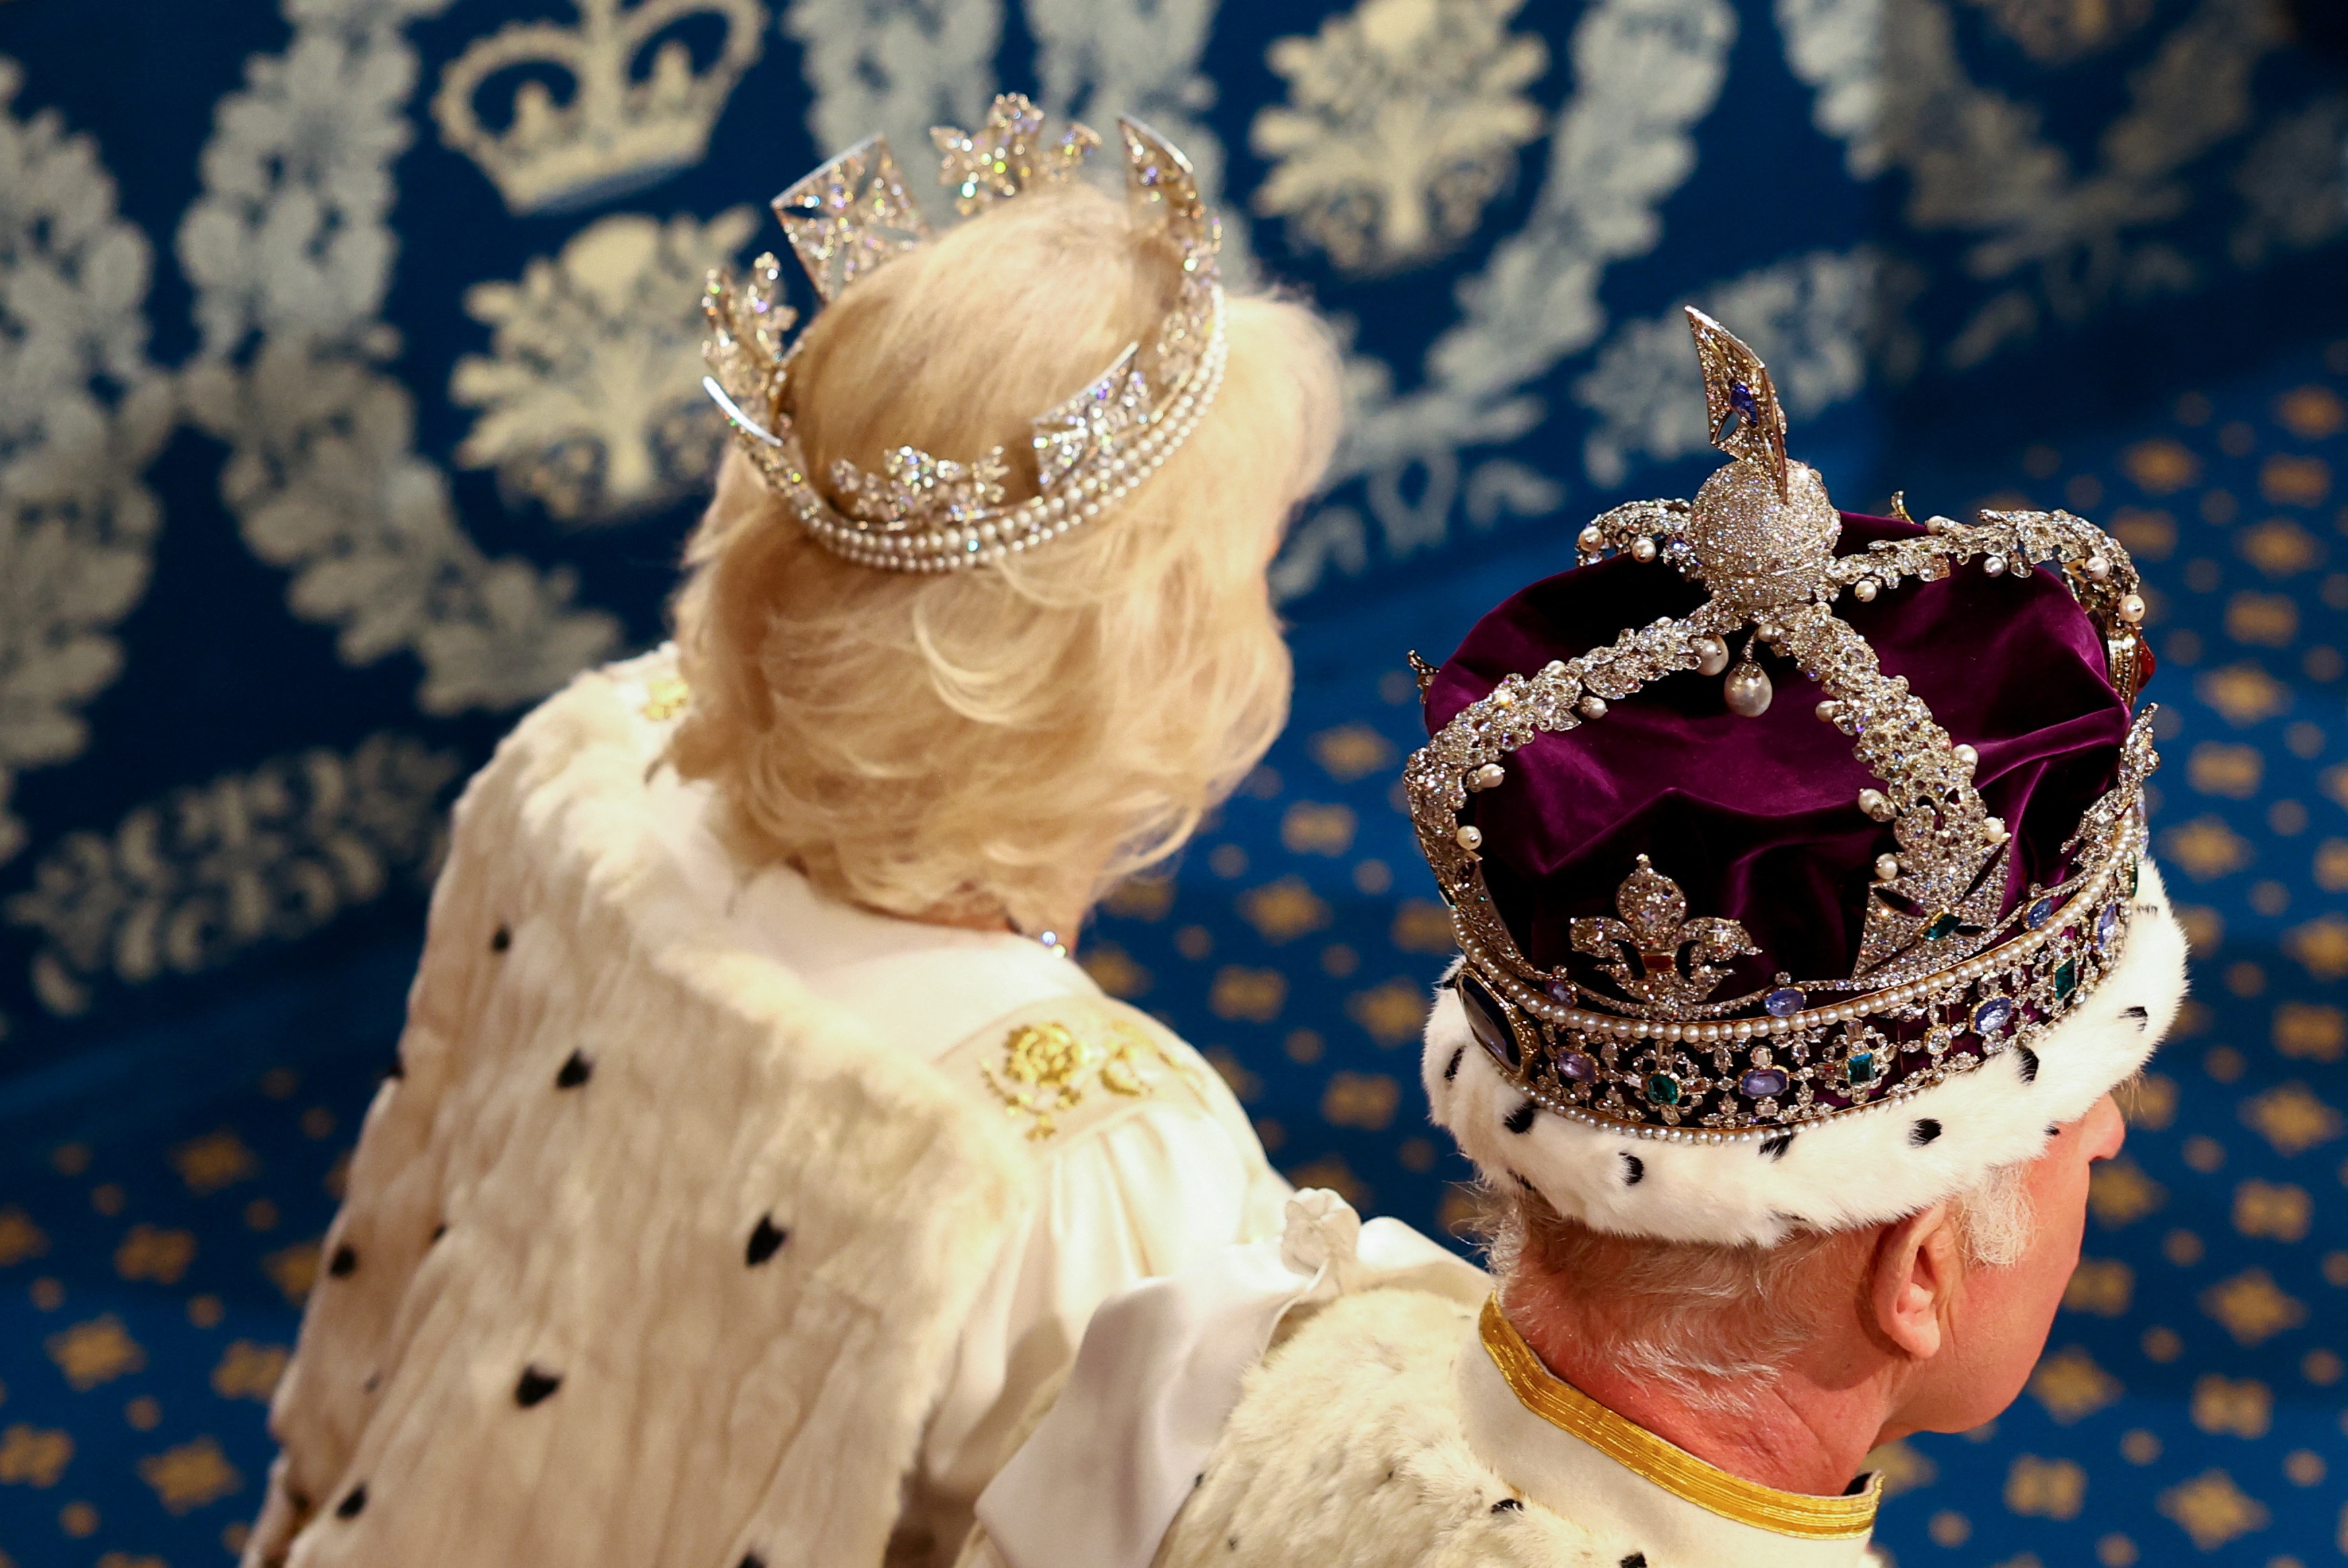 A photo taken from over the top of the King and Queen showing off their crowns